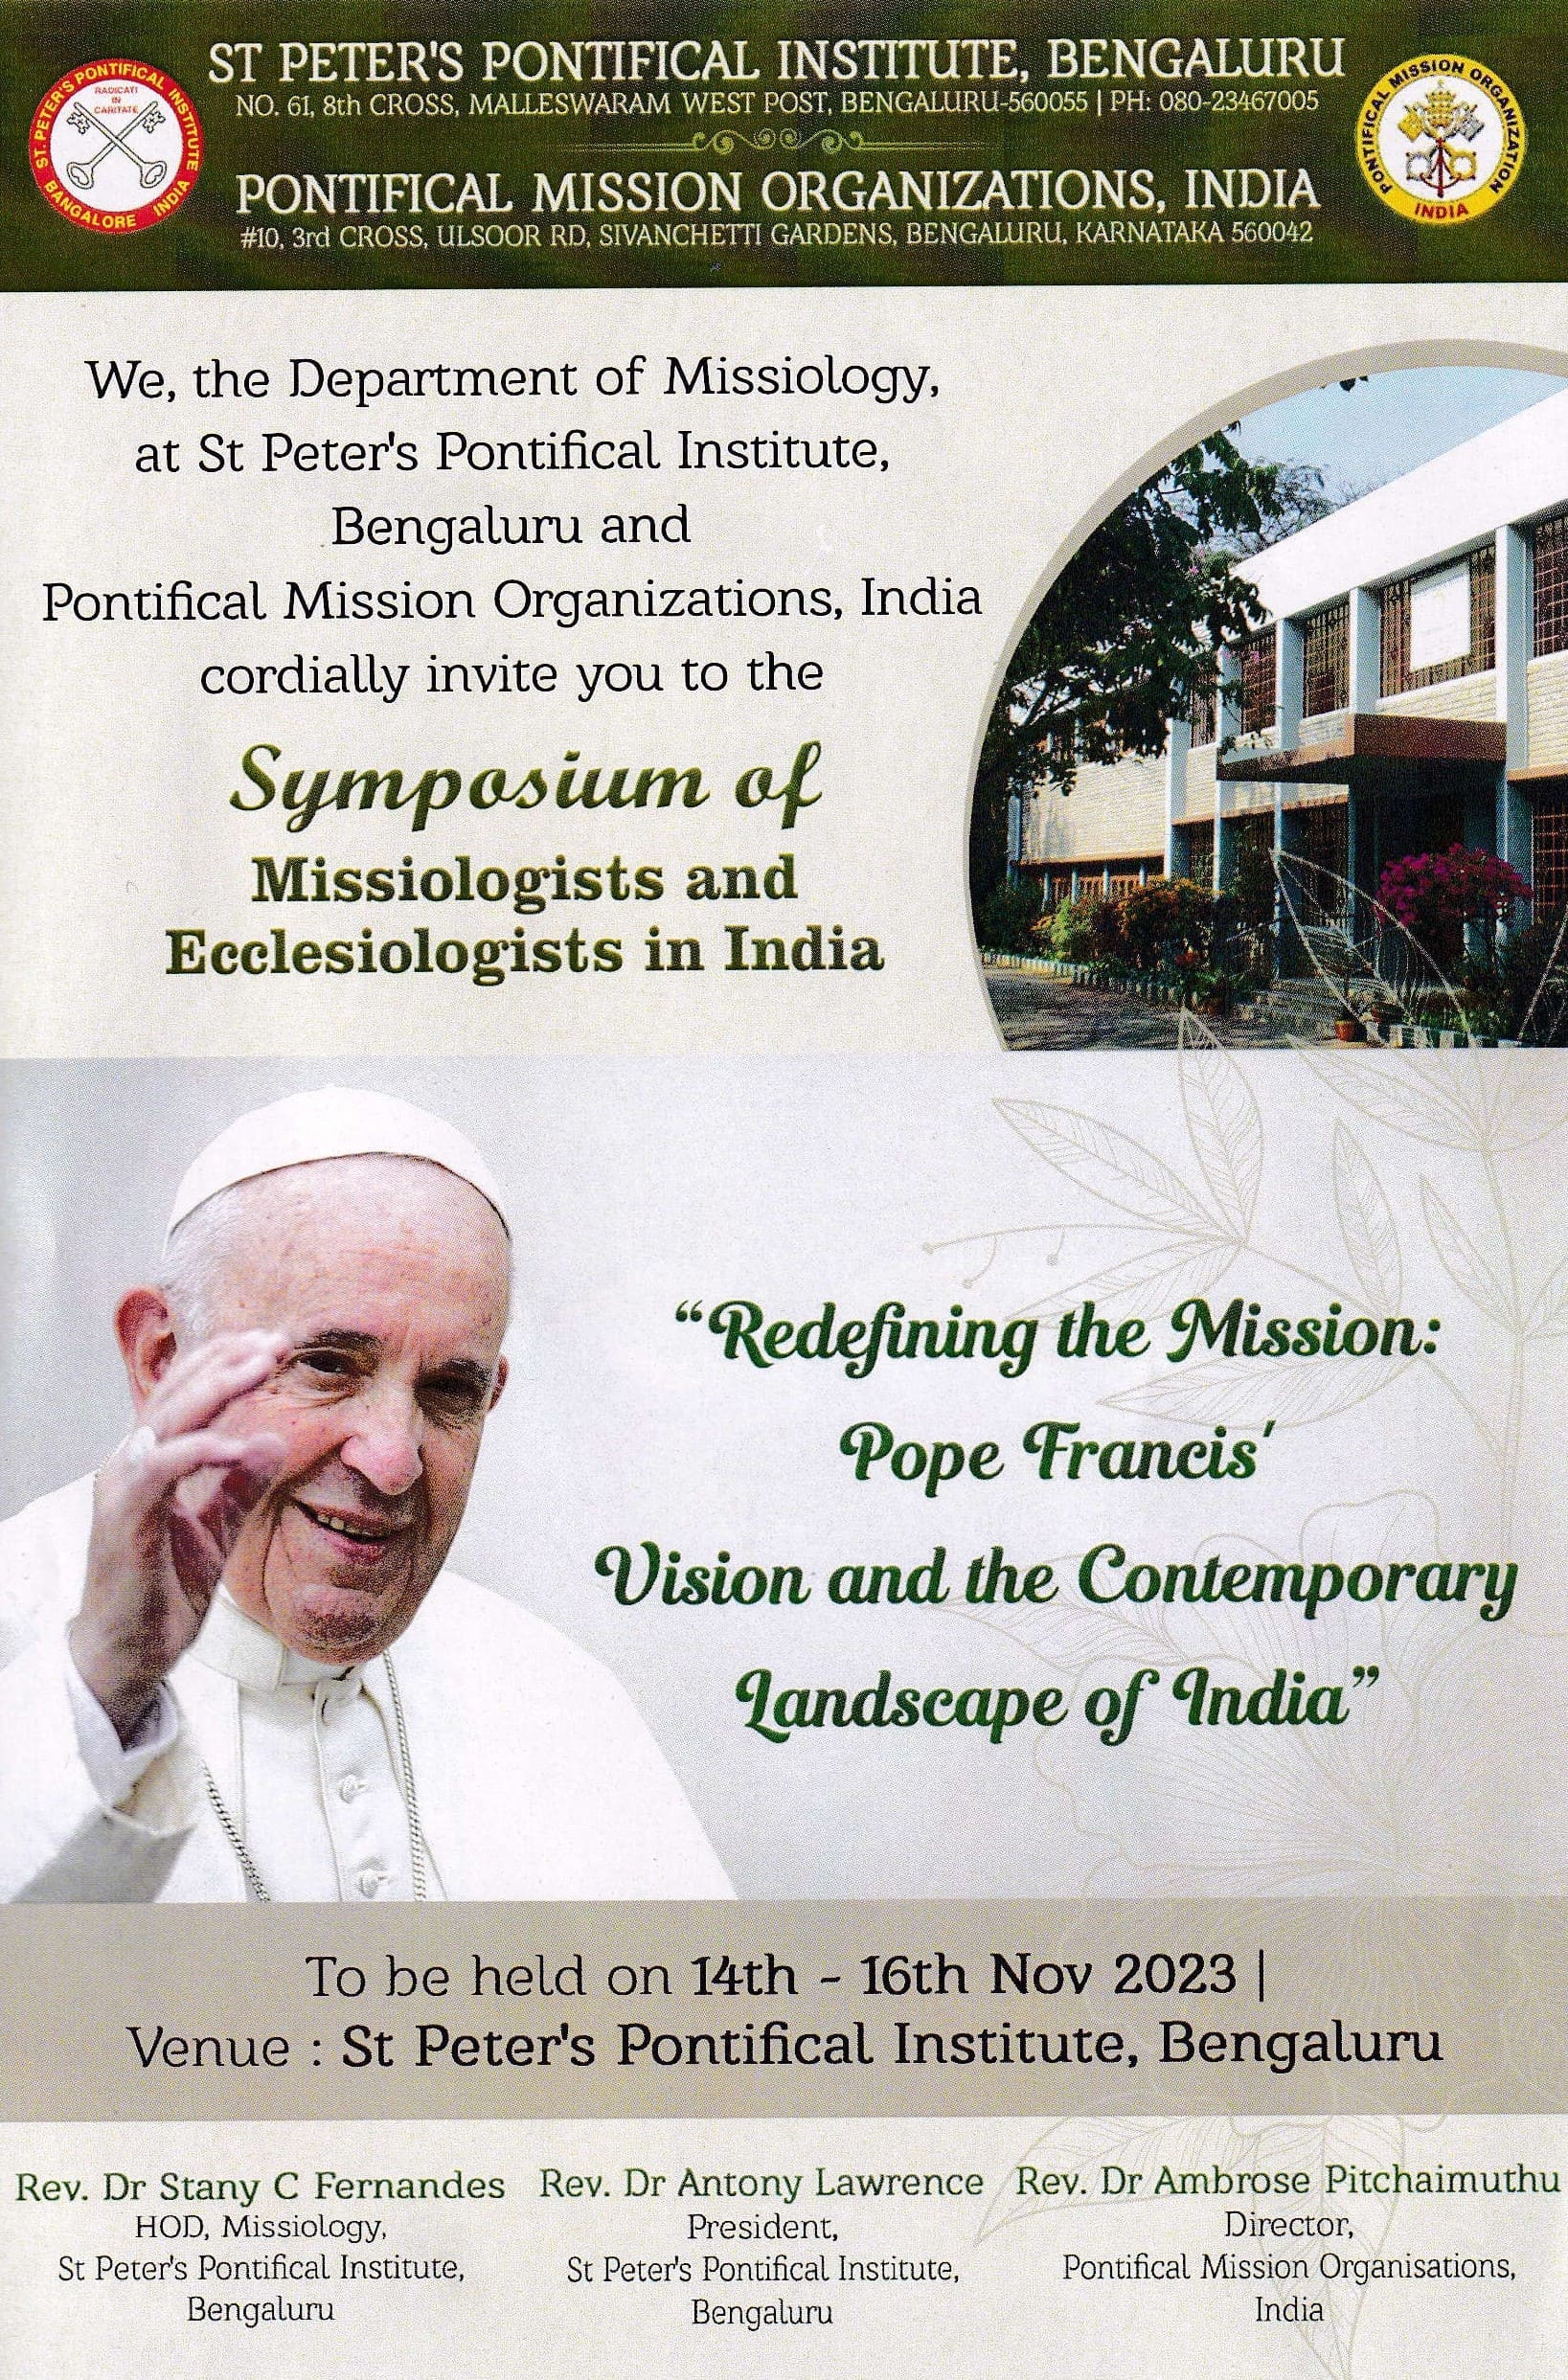 Symposium of Missiologists and Ecclesiologists in India